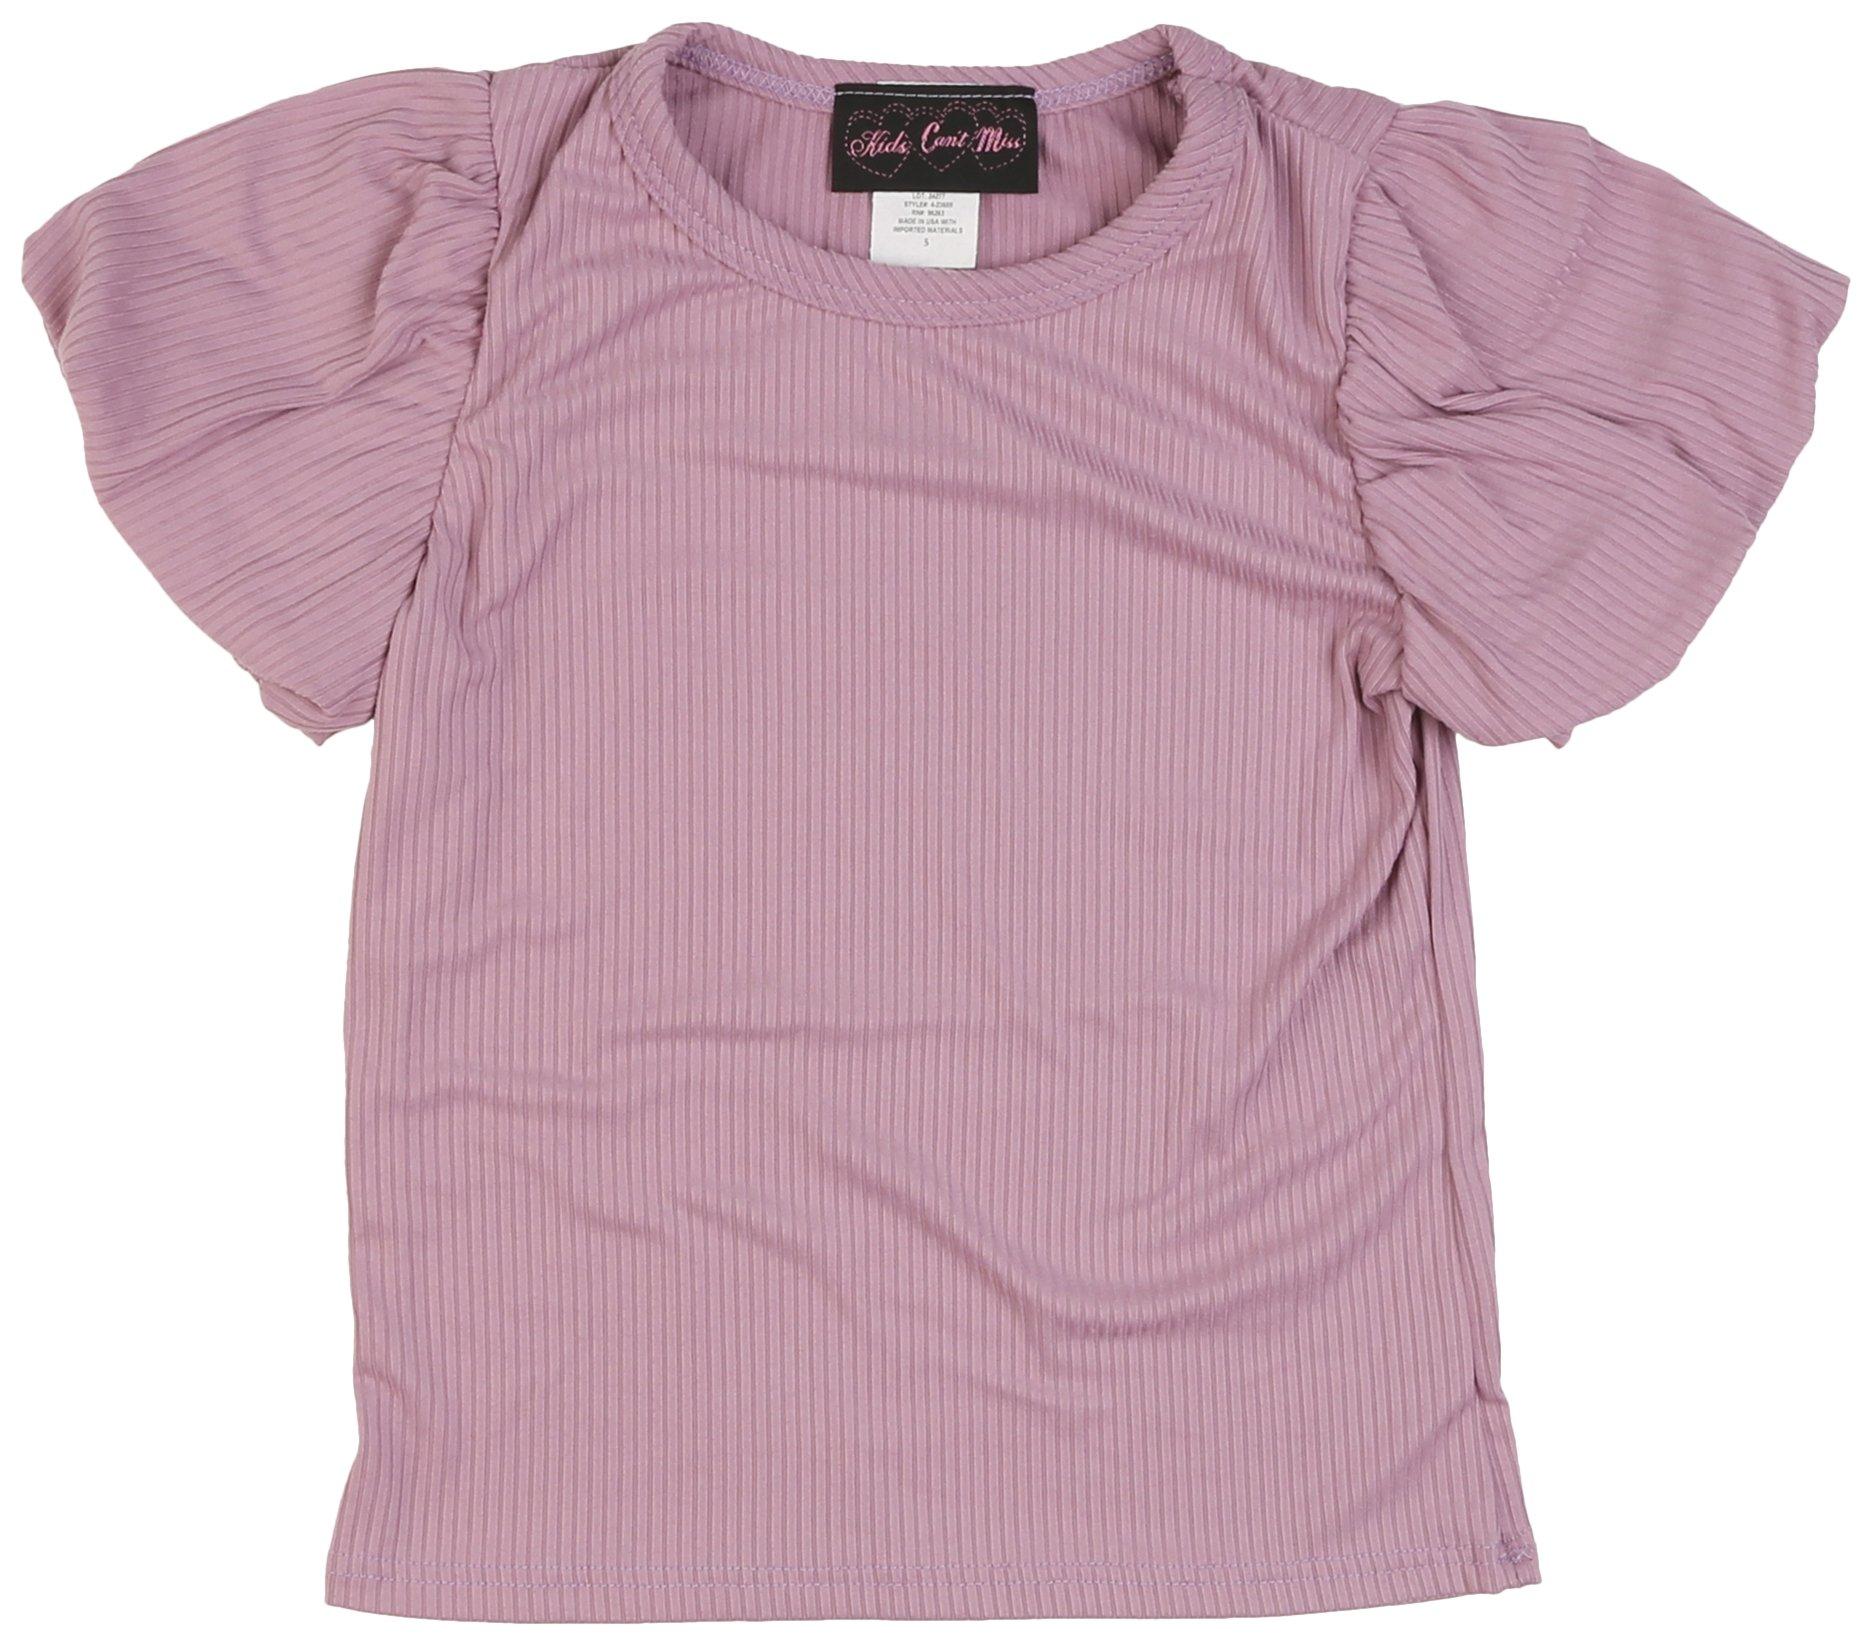 Kid's Can't Miss Little Girls Ribbed Short Sleeve Tee